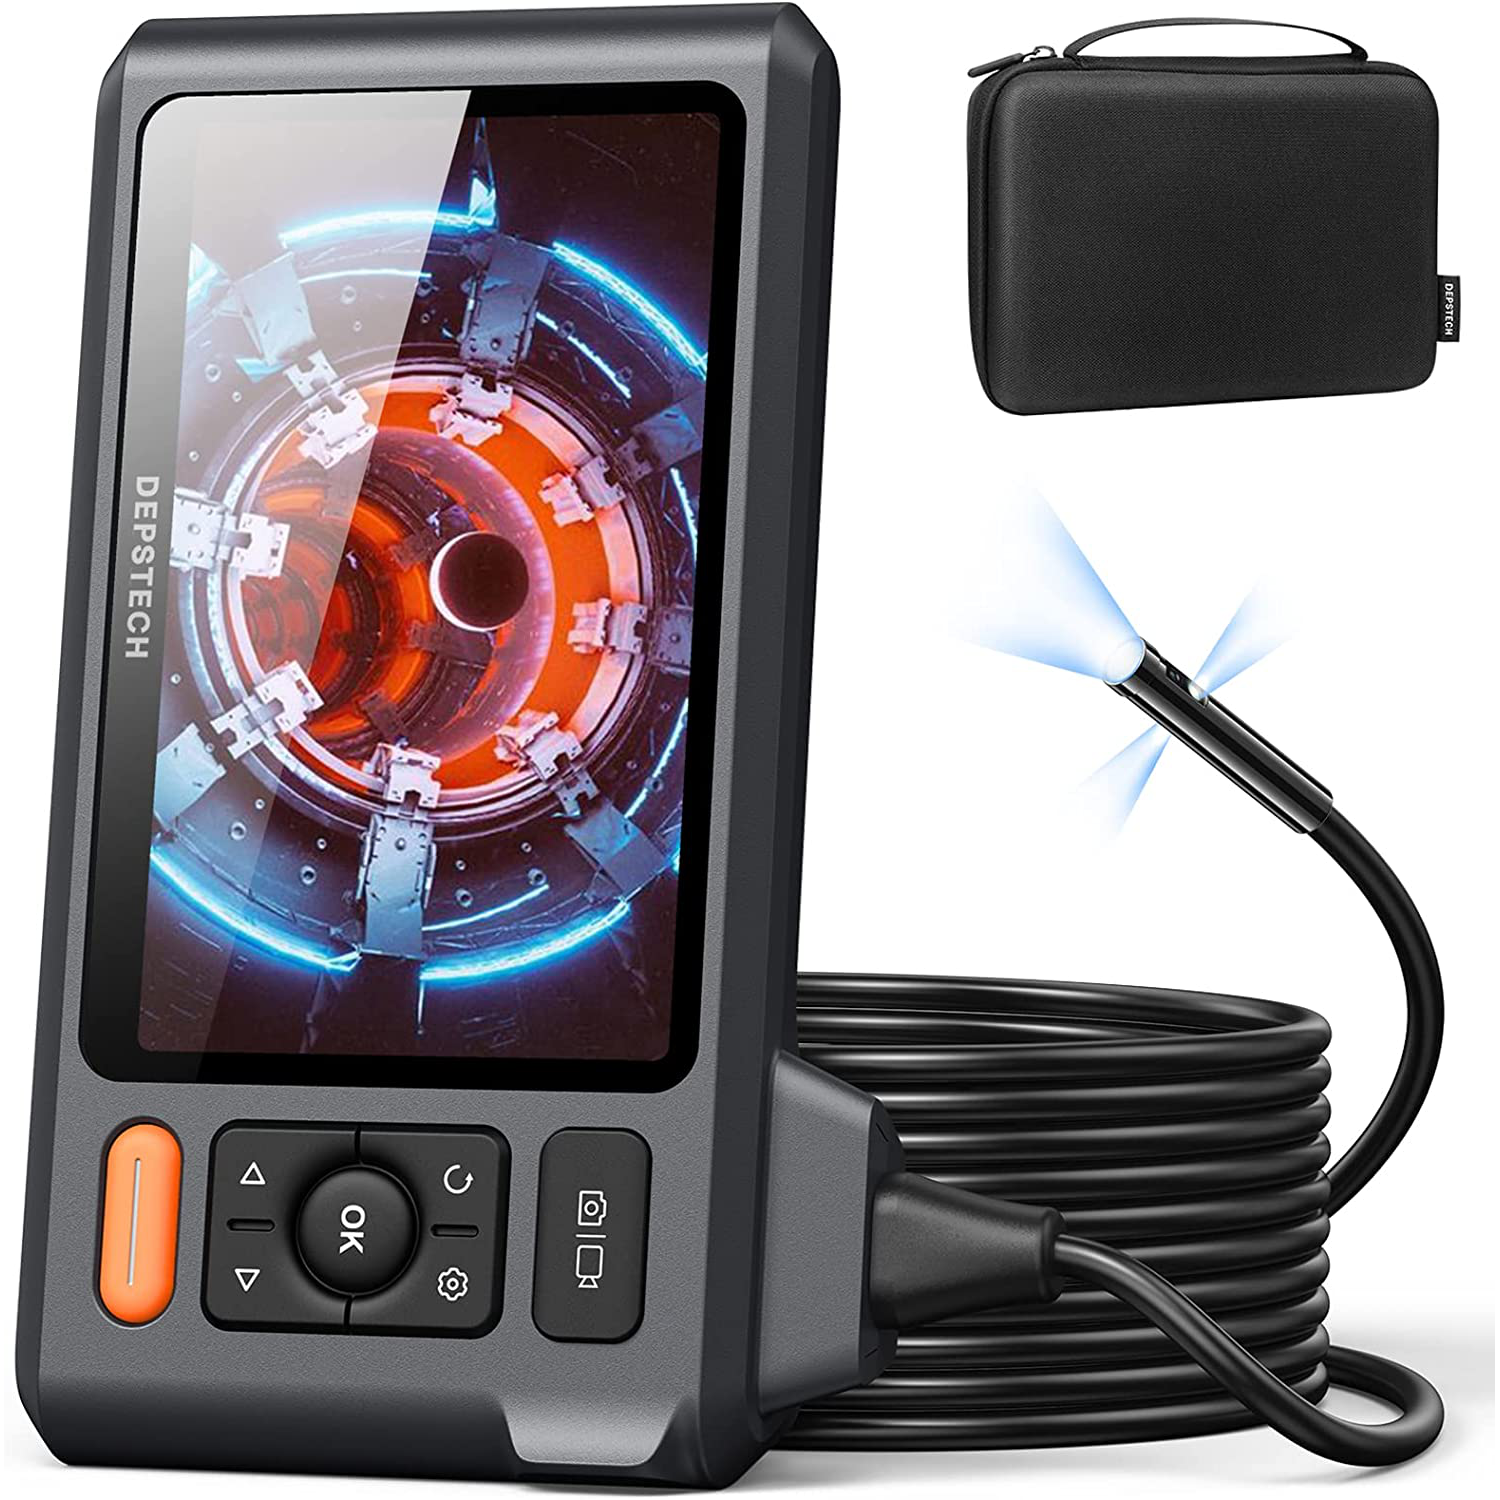 DEPSTECH 5 IPS Screen Borescope Inspection Camera with 4.92ft